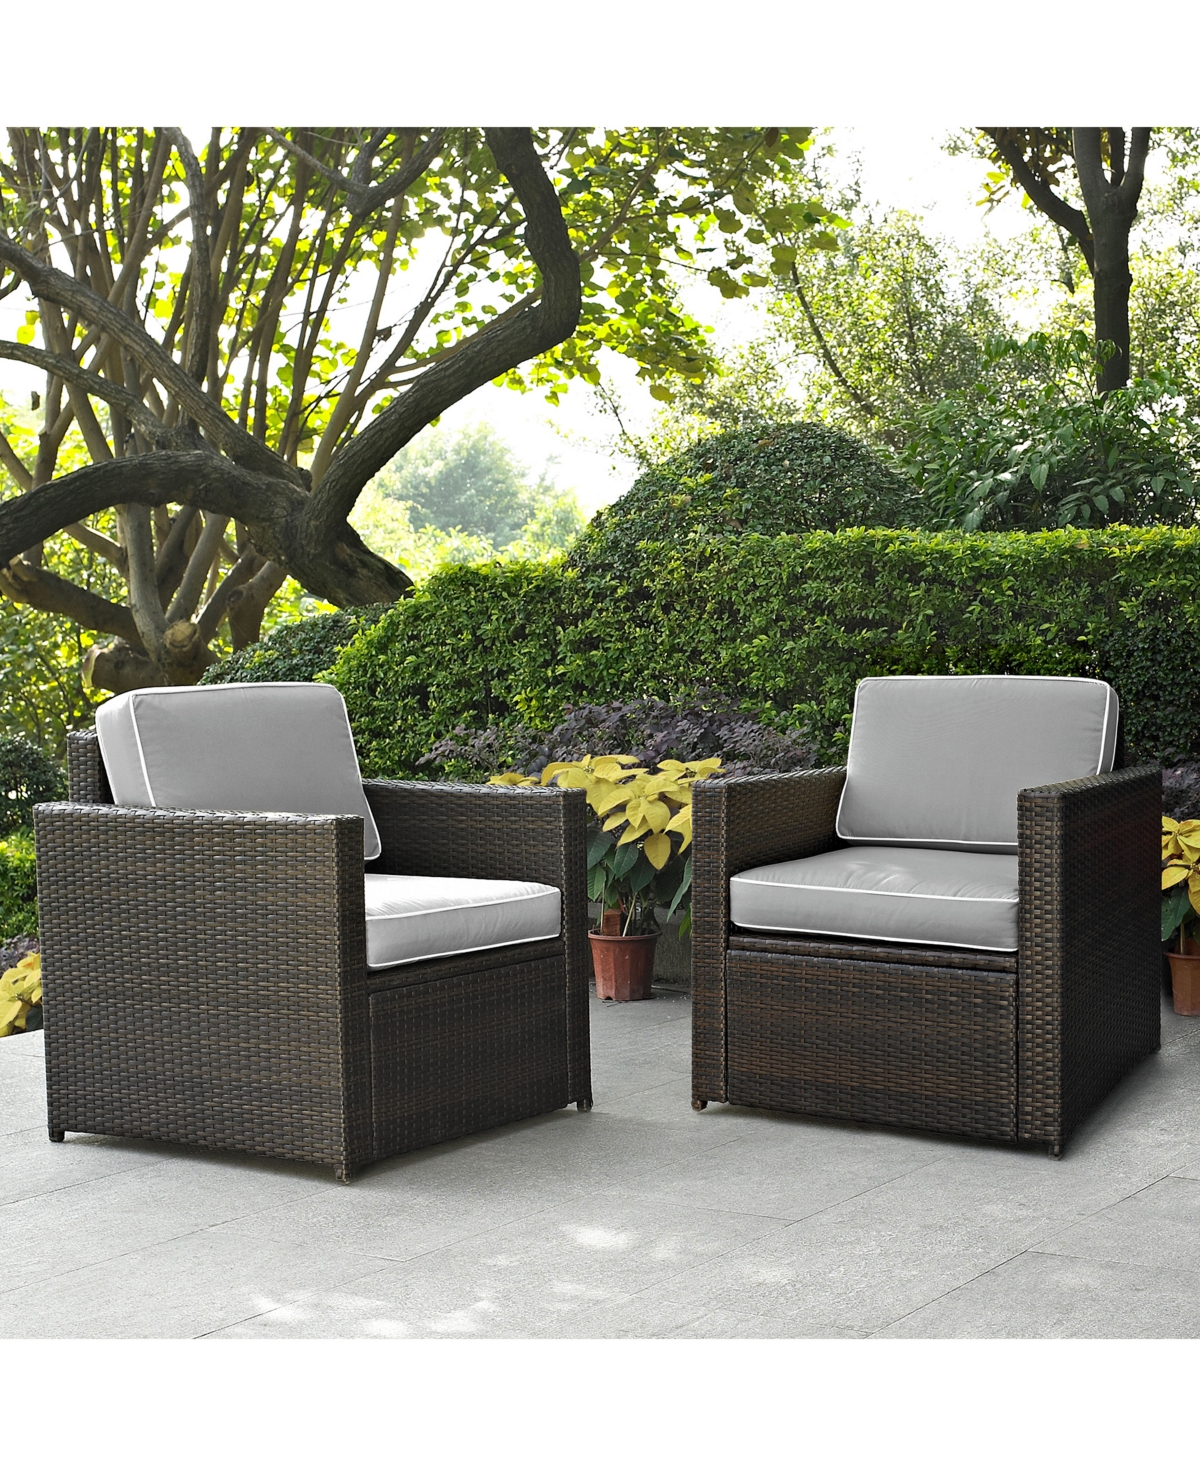 Shop Crosley Palm Harbor 2 Piece Outdoor Wicker Seating Set With Cushions In Grey